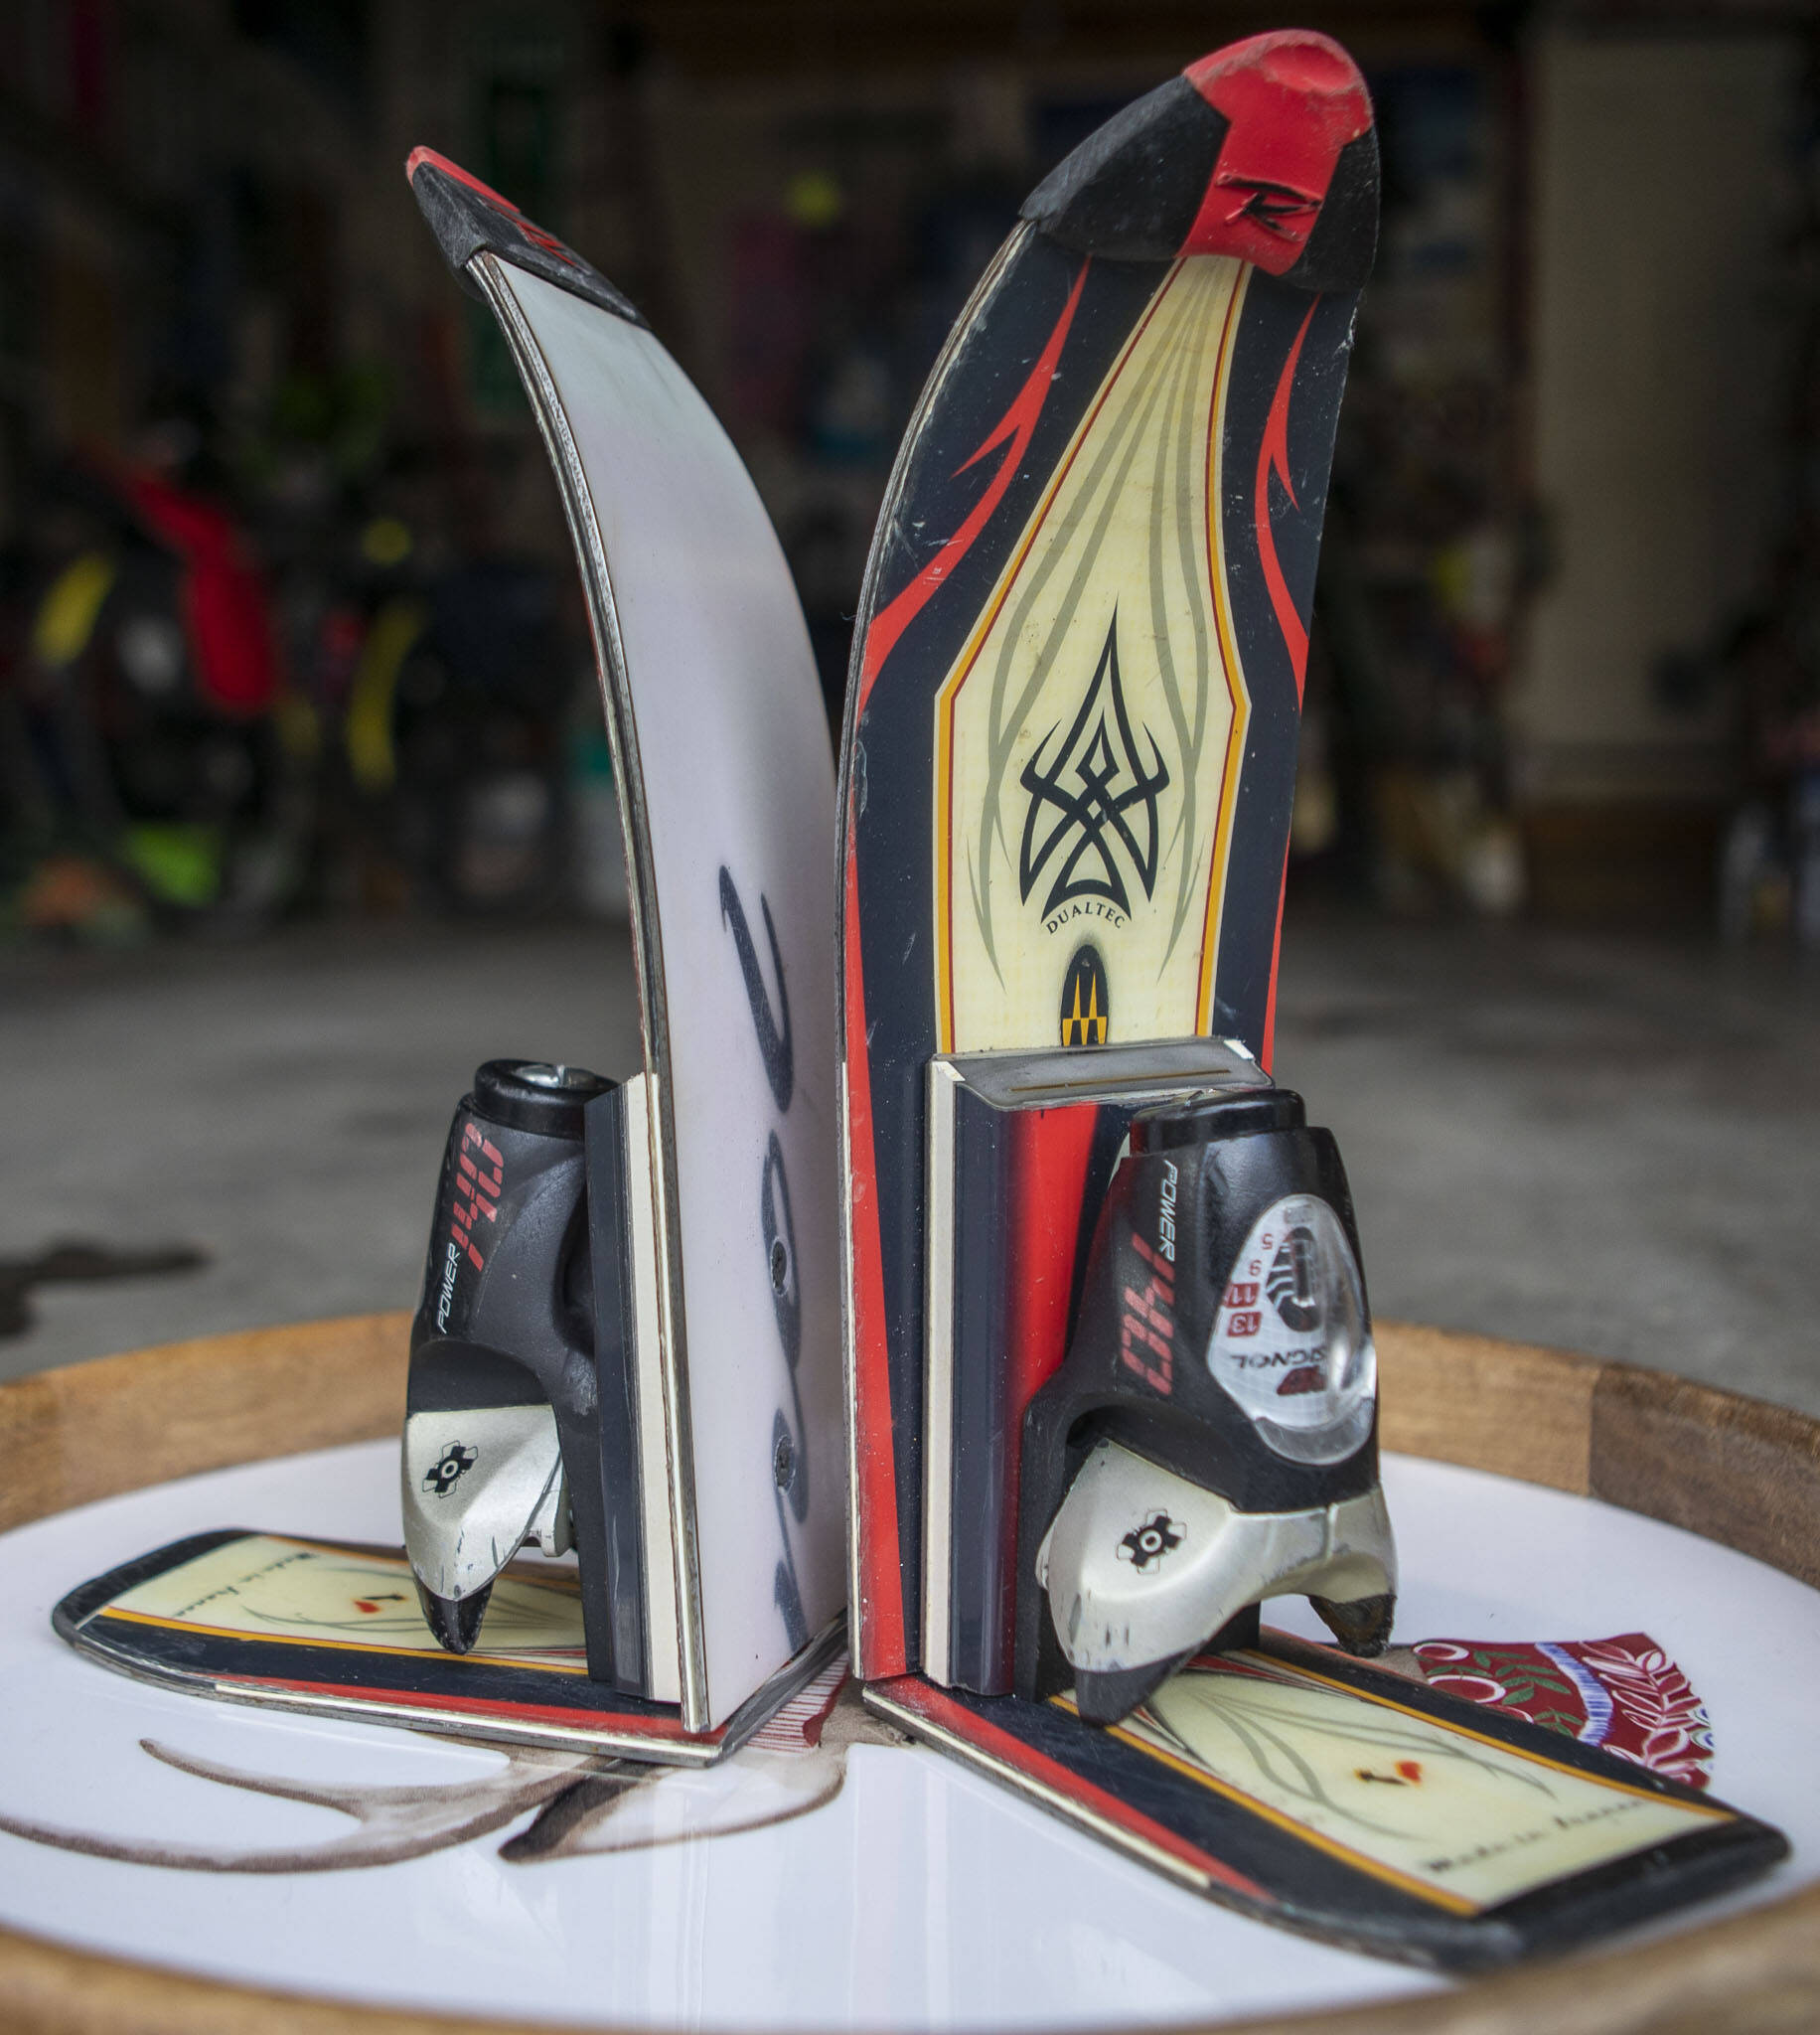 Brian Geppert fashioned these bookends from cast-off skis. (Annie Barker / The Herald)